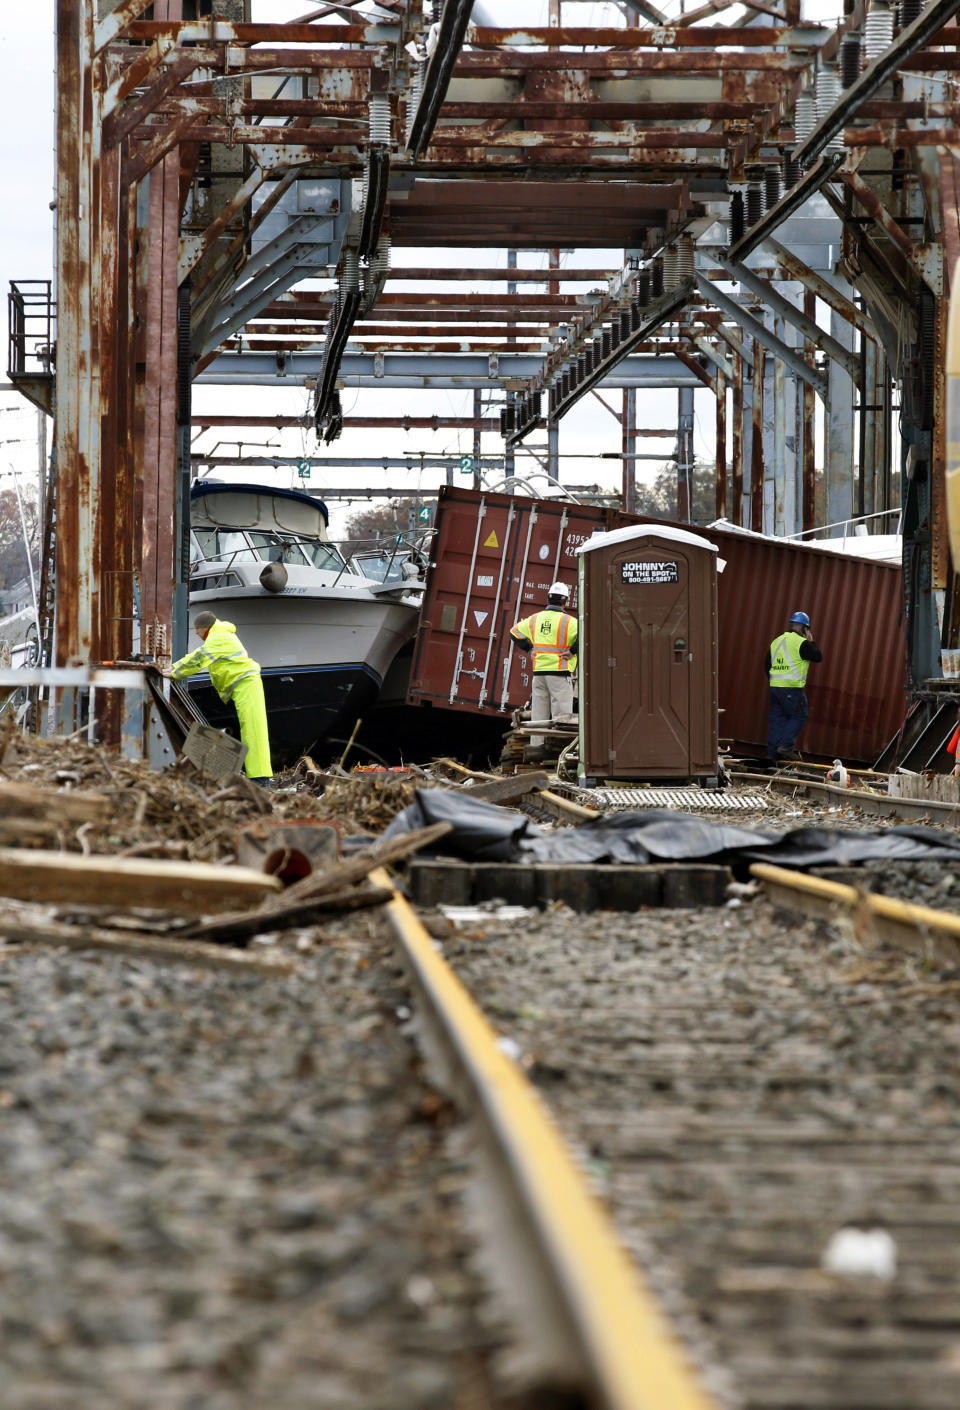 Workers try to clear boats and debris from the New Jersey Transit Morgan draw bridge Wednesday, Oct. 31, 2012, in South Amboy, N.J., after Monday's storm surge from Sandy pushed boats and cargo containers onto the train tracks. New Jersey Transit's North Jersey Coast Line, which provides train service from the New Jersey shore towns to New York City, may experience prolonged disruption. (AP Photo/Mel Evans)